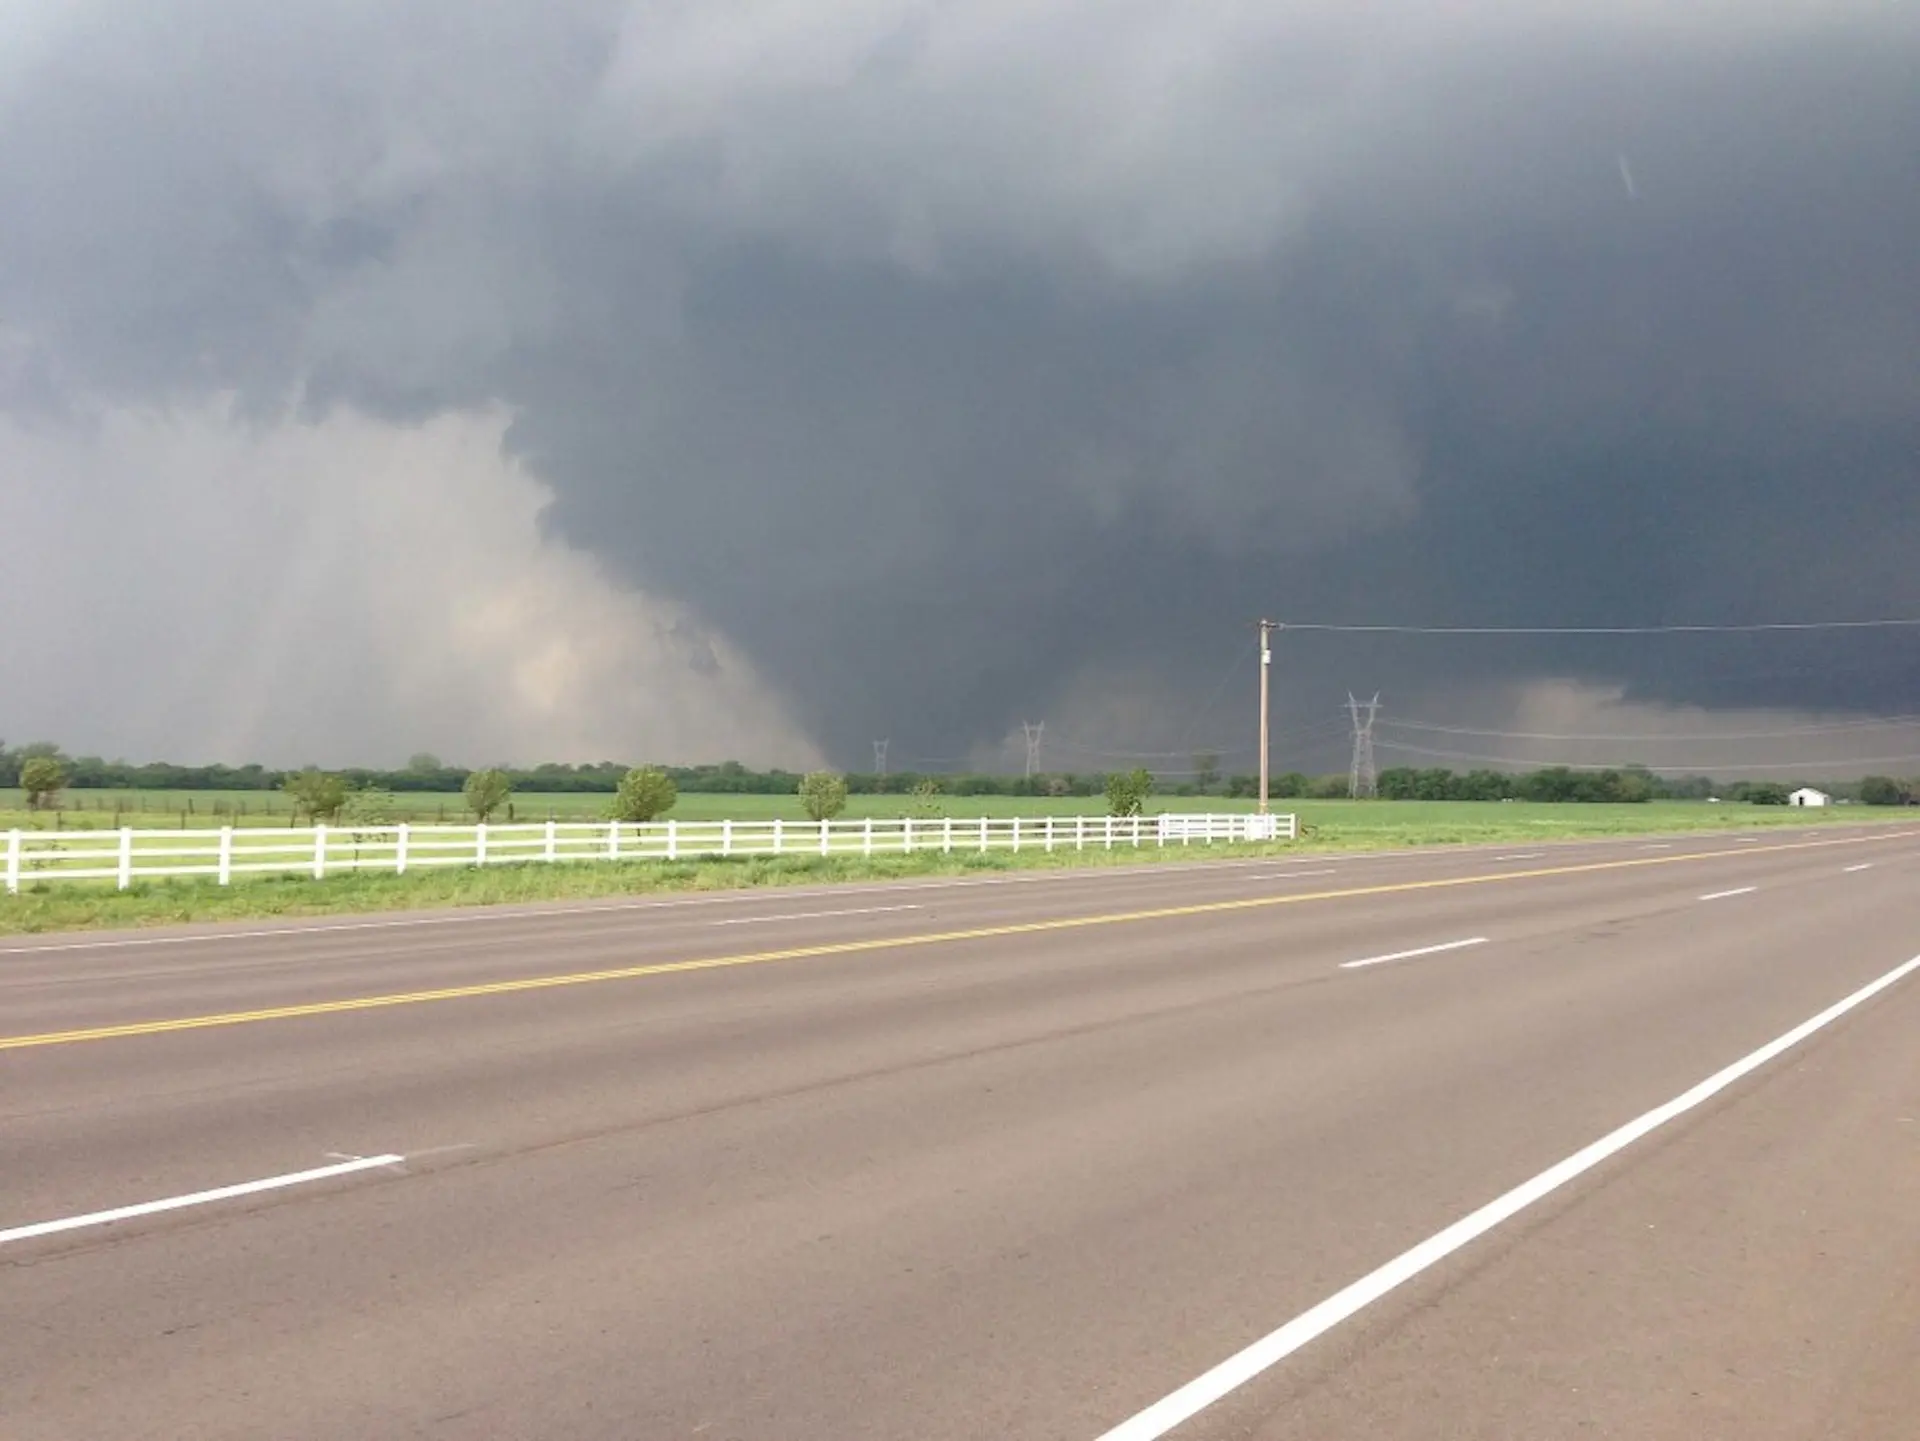 Storm chasers captured harrowing scenes of the 2013 Oklahoma tornado